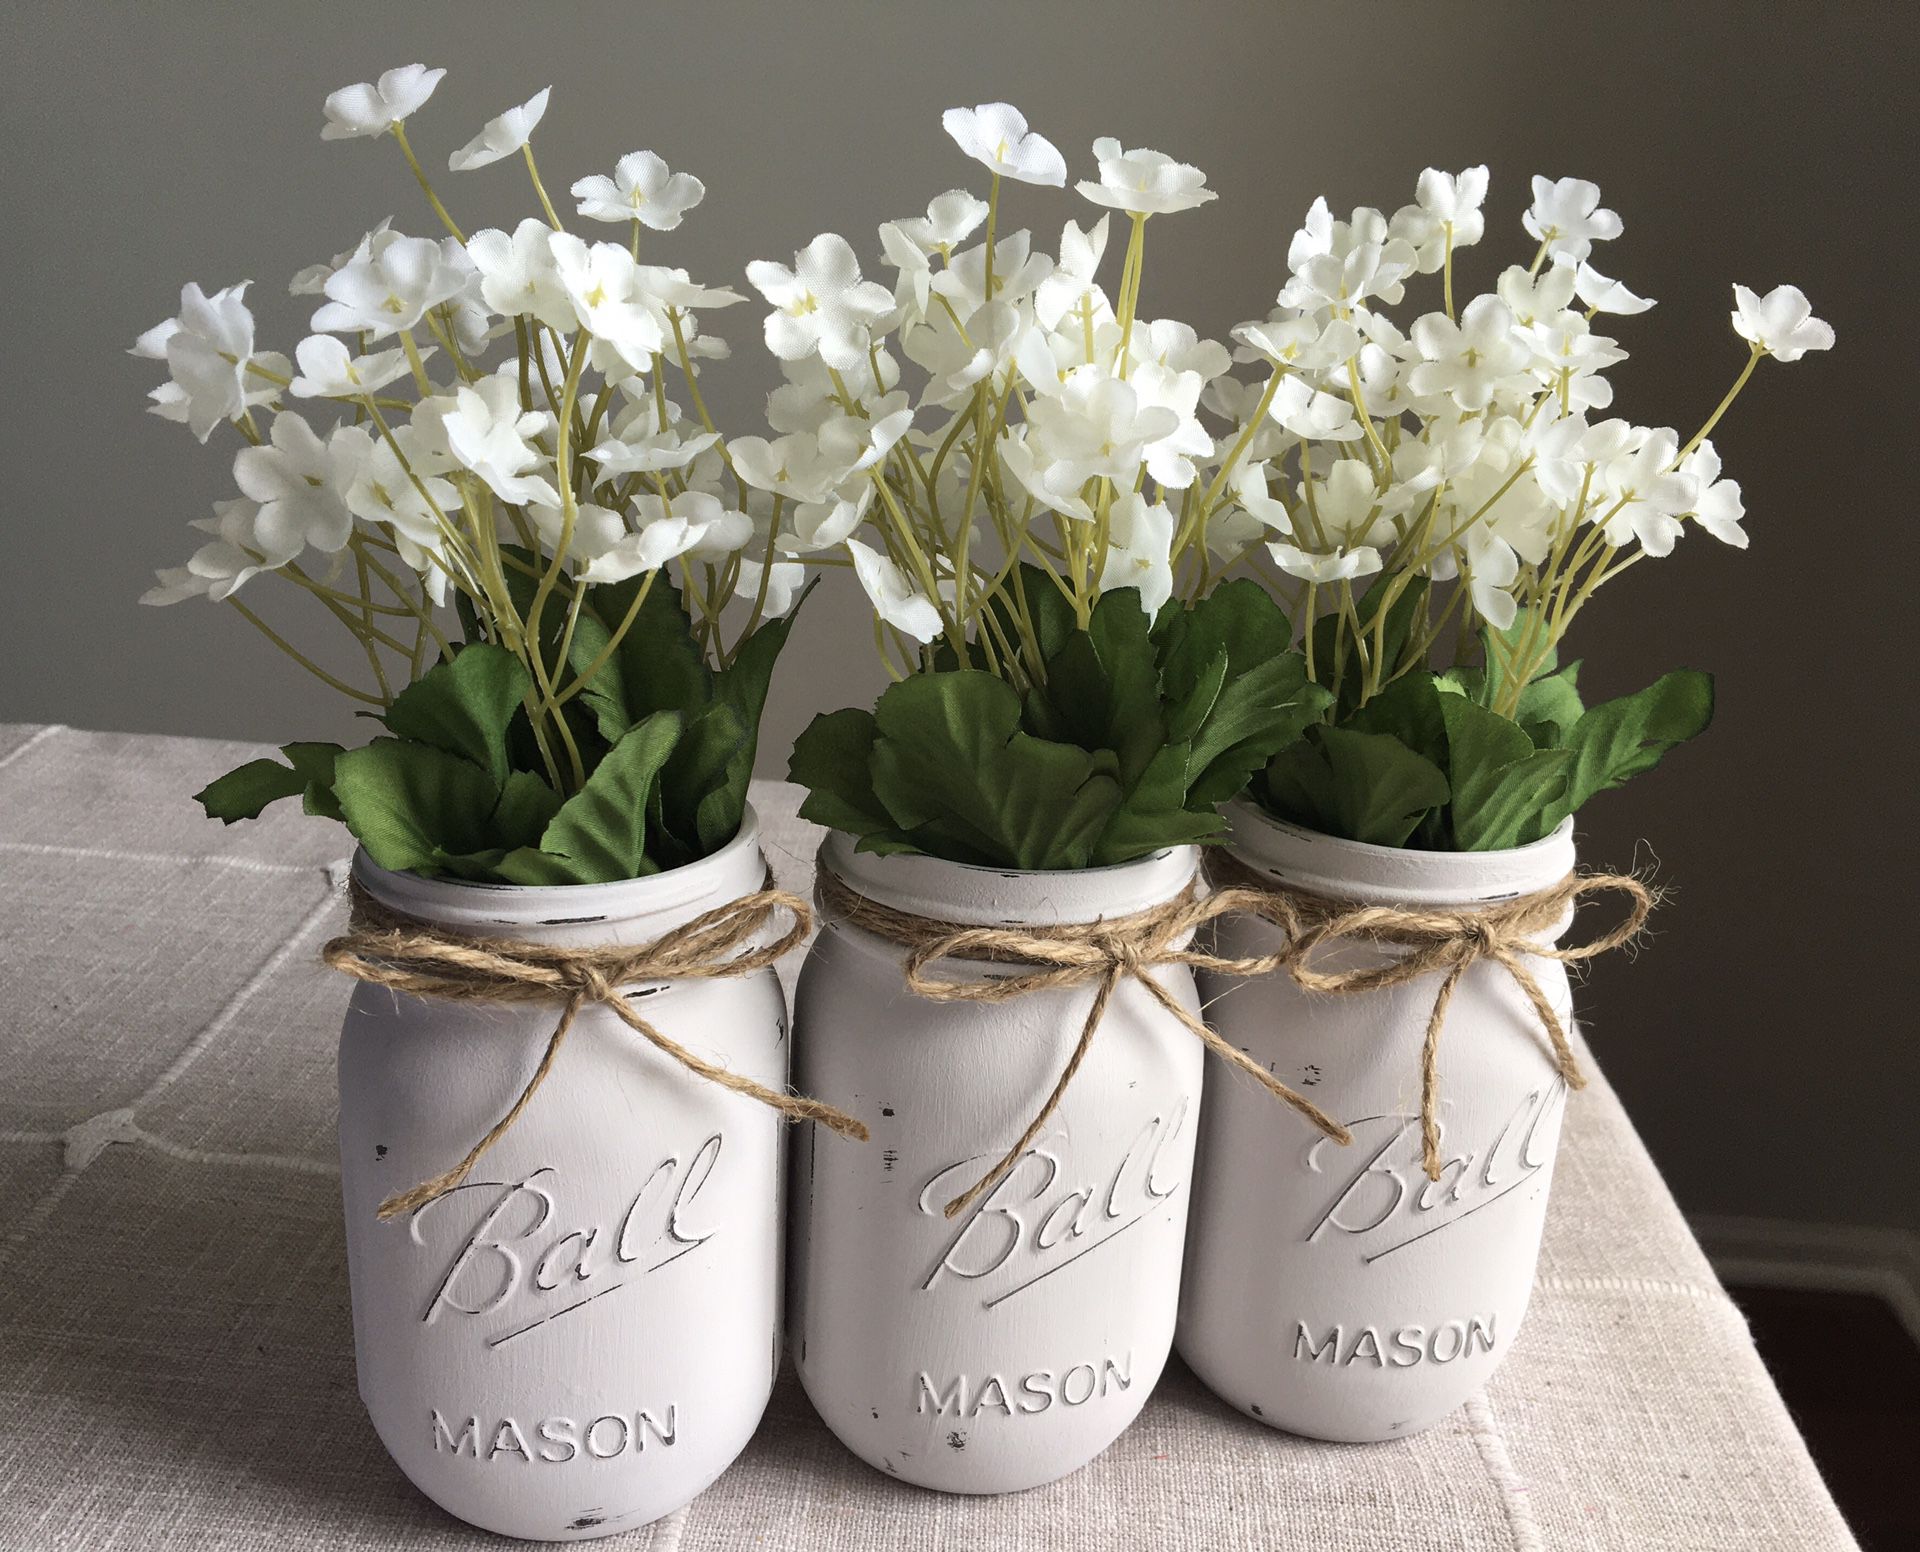 Distressed mason jar vases with silk flowers included! $13 for 3 You pick the jar/flower colors